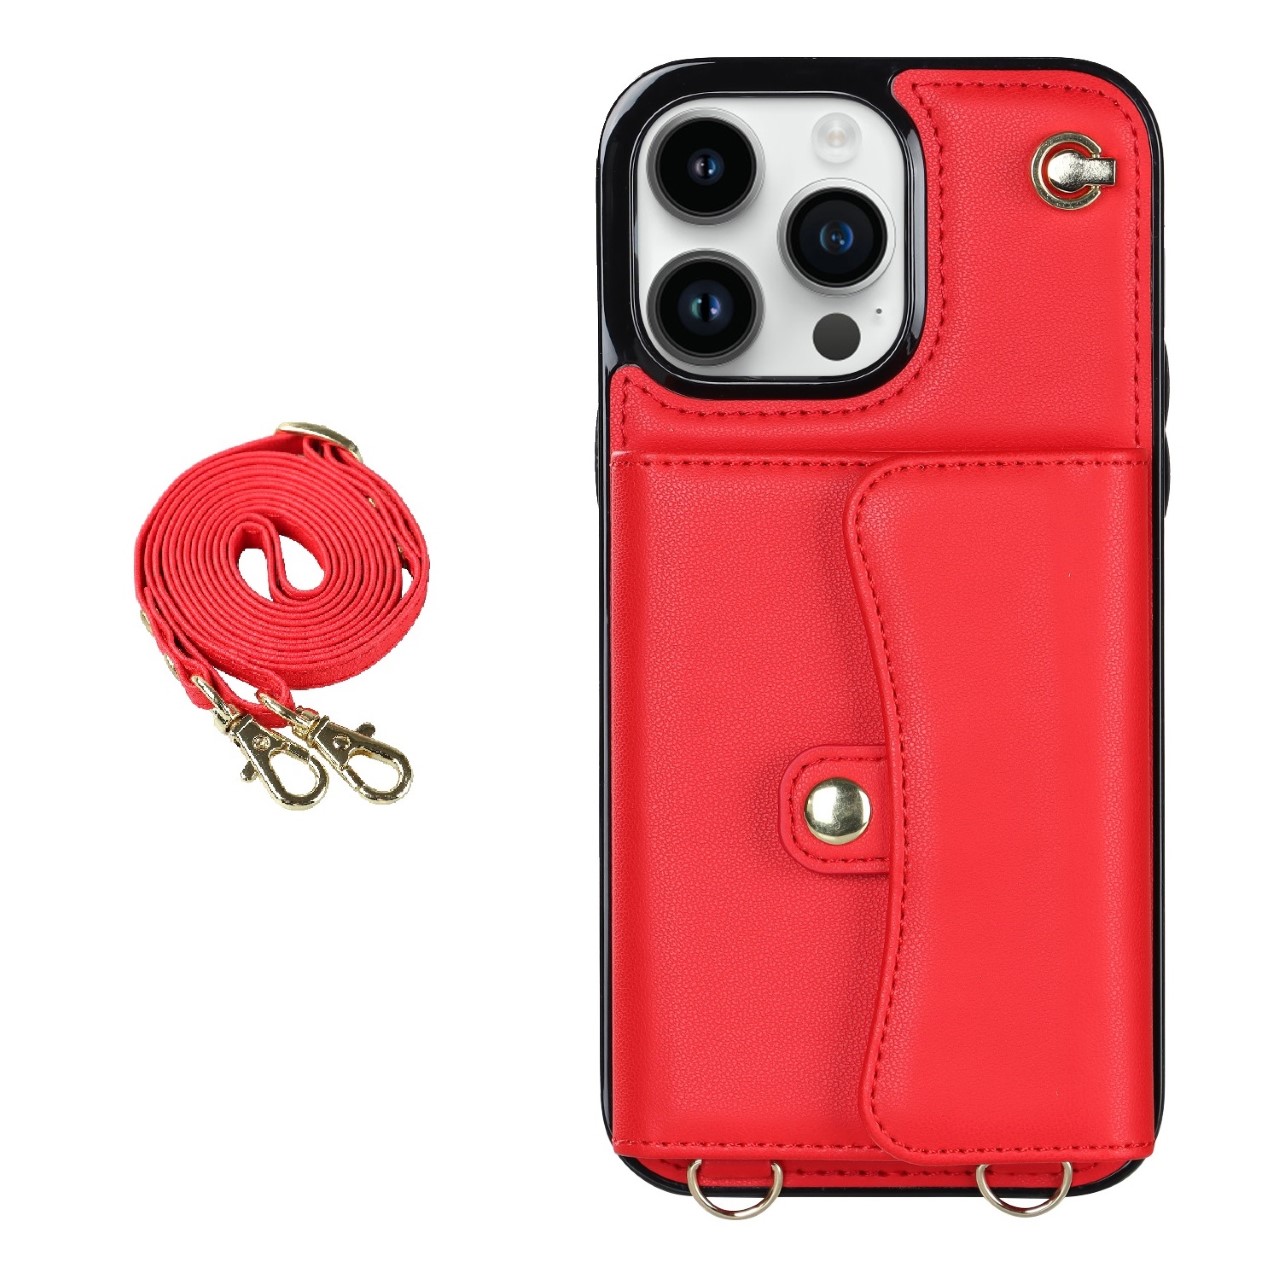 Samsung Galaxy A53 Back Cover Hoesje met Koord - Back Cover - Kunstleer - Pasjeshouder - Koord - Samsung Galaxy A53 - Rood